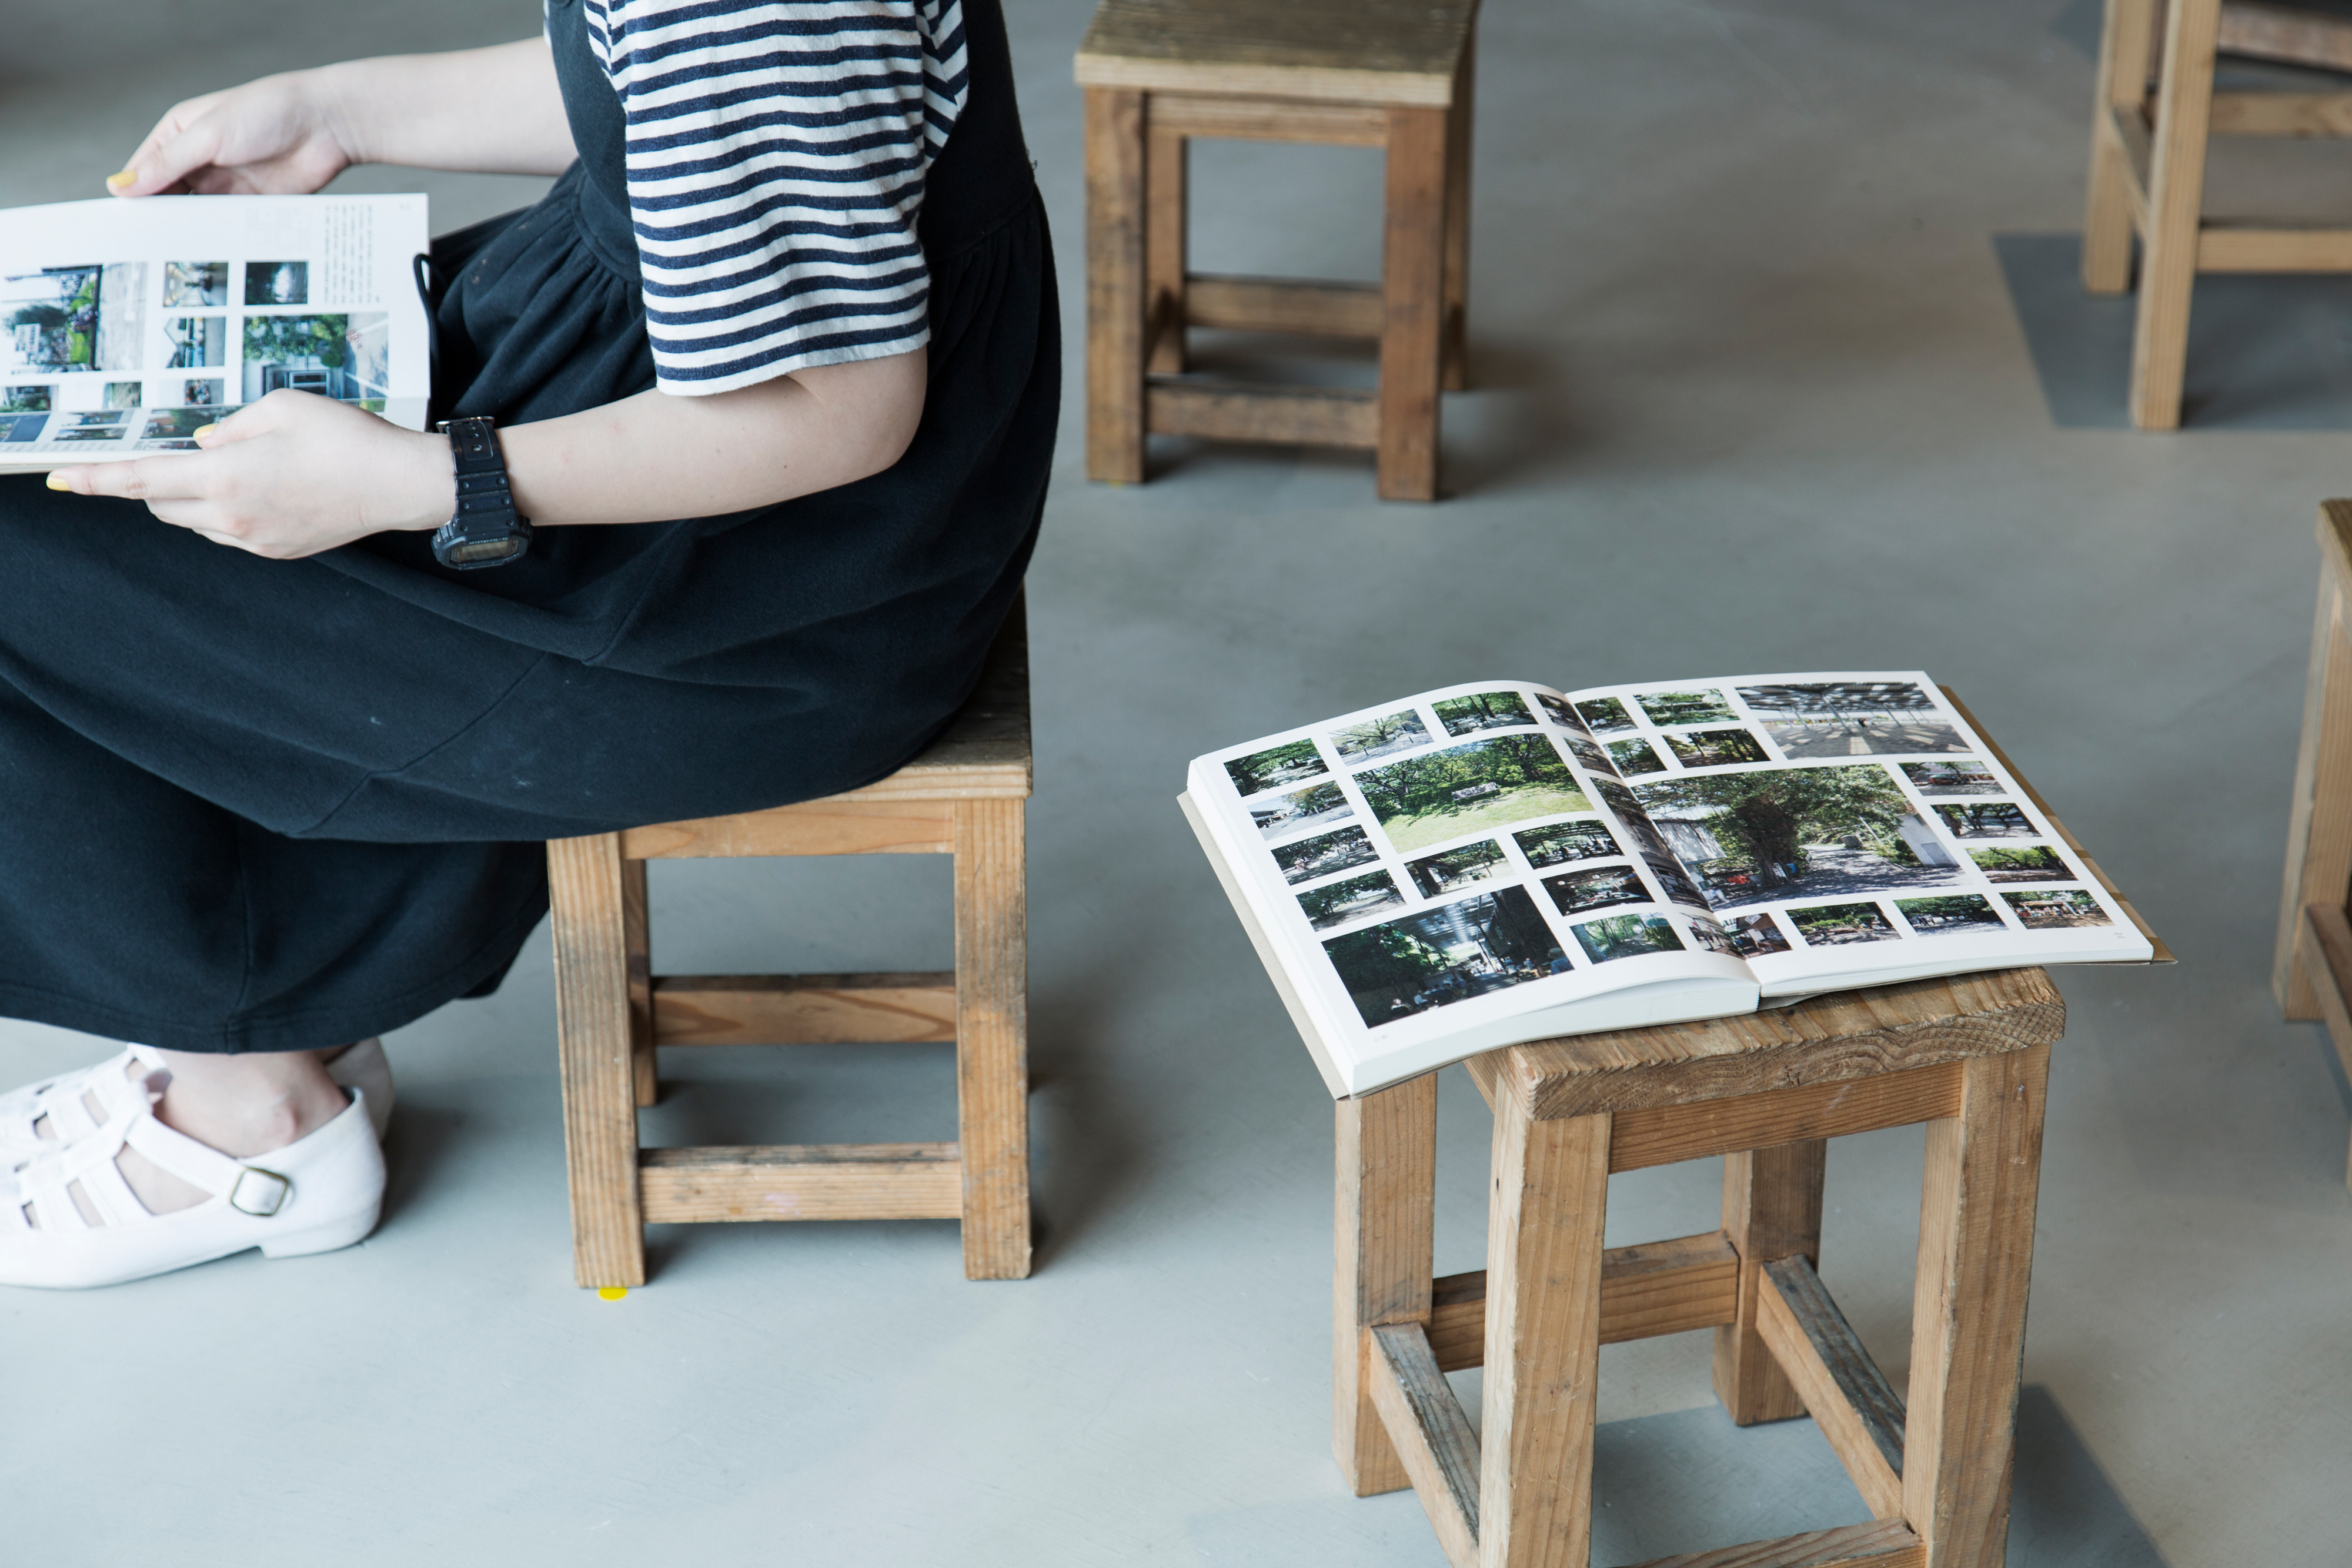 Open book of images on stool with person sitting next to it